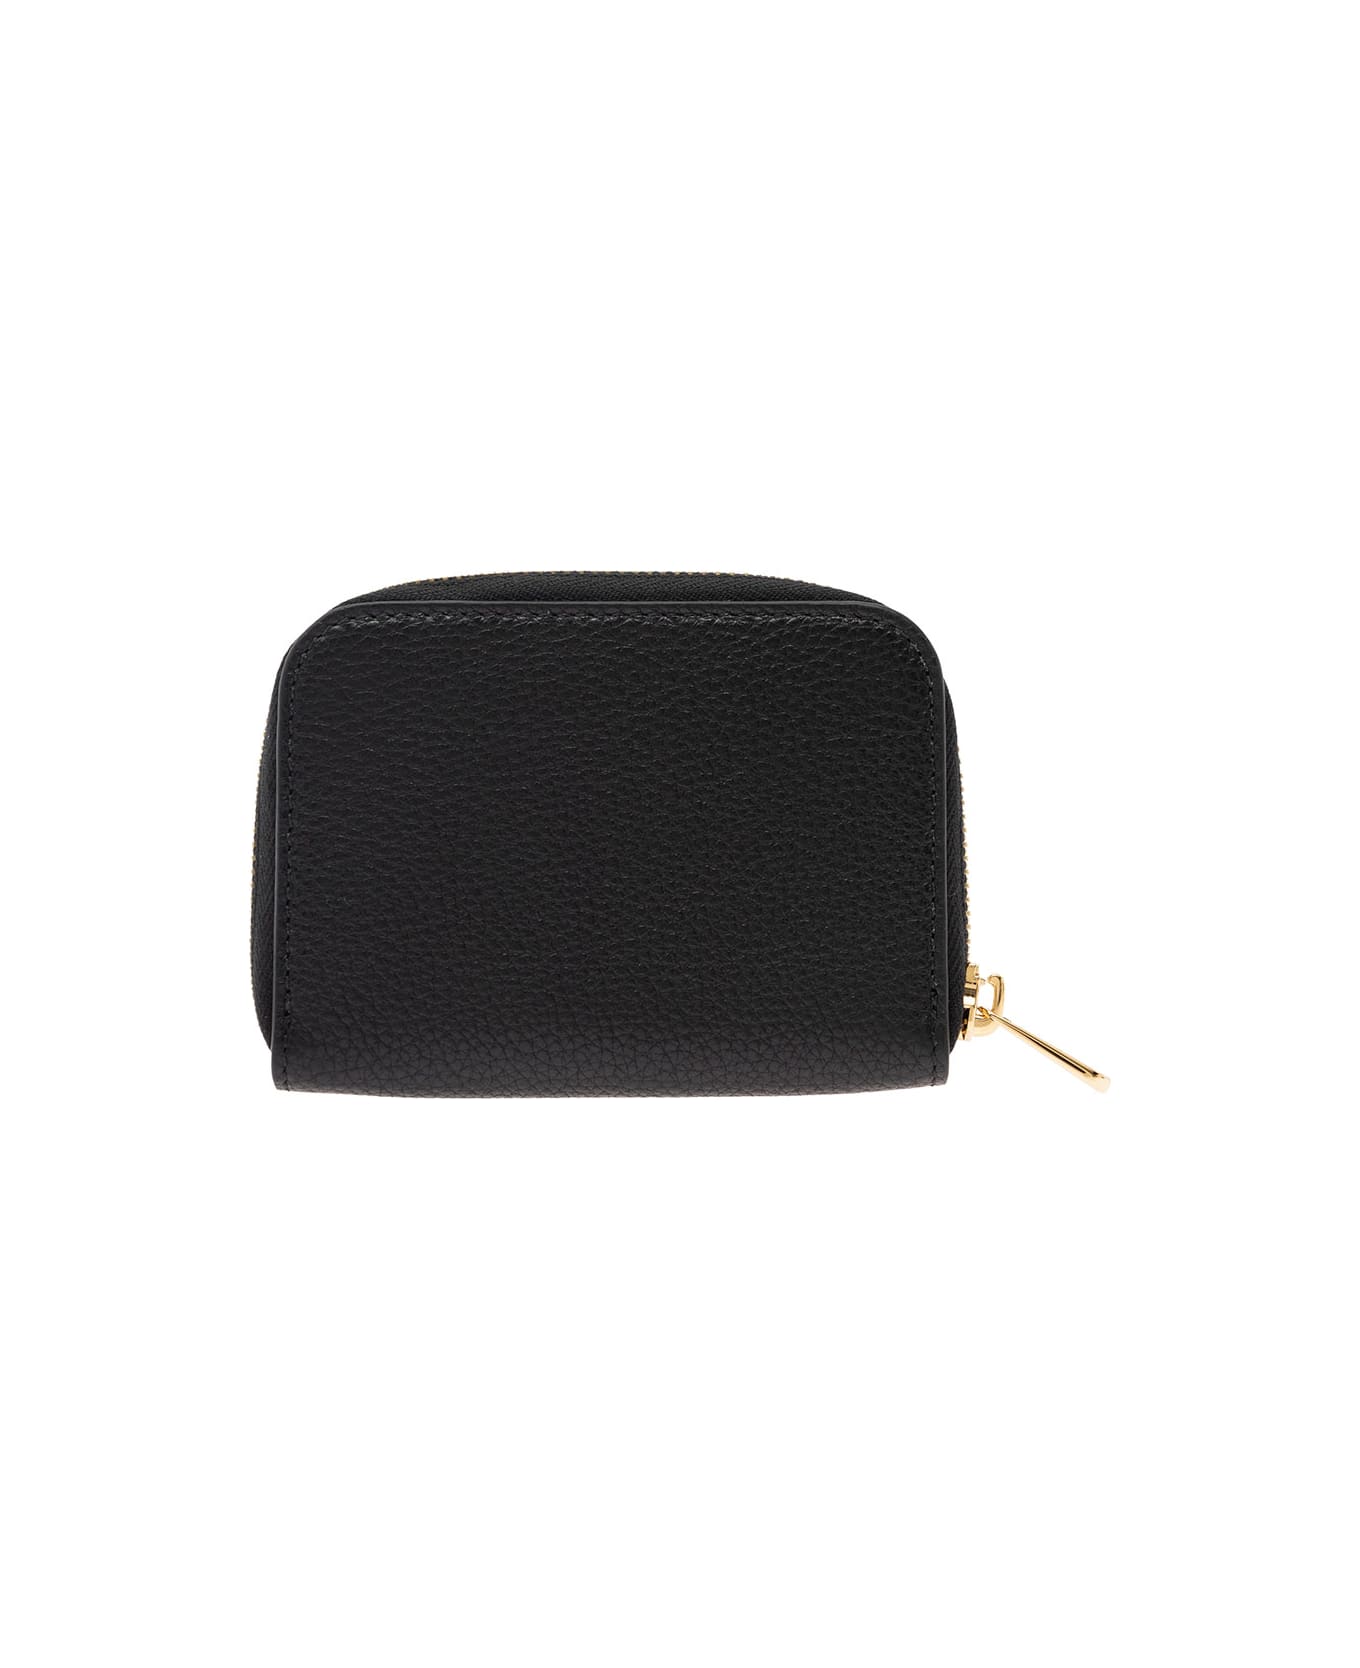 Ferragamo Black Coin Purse With Gancino Logo In Hammered Leaher Woman - Black アクセサリー